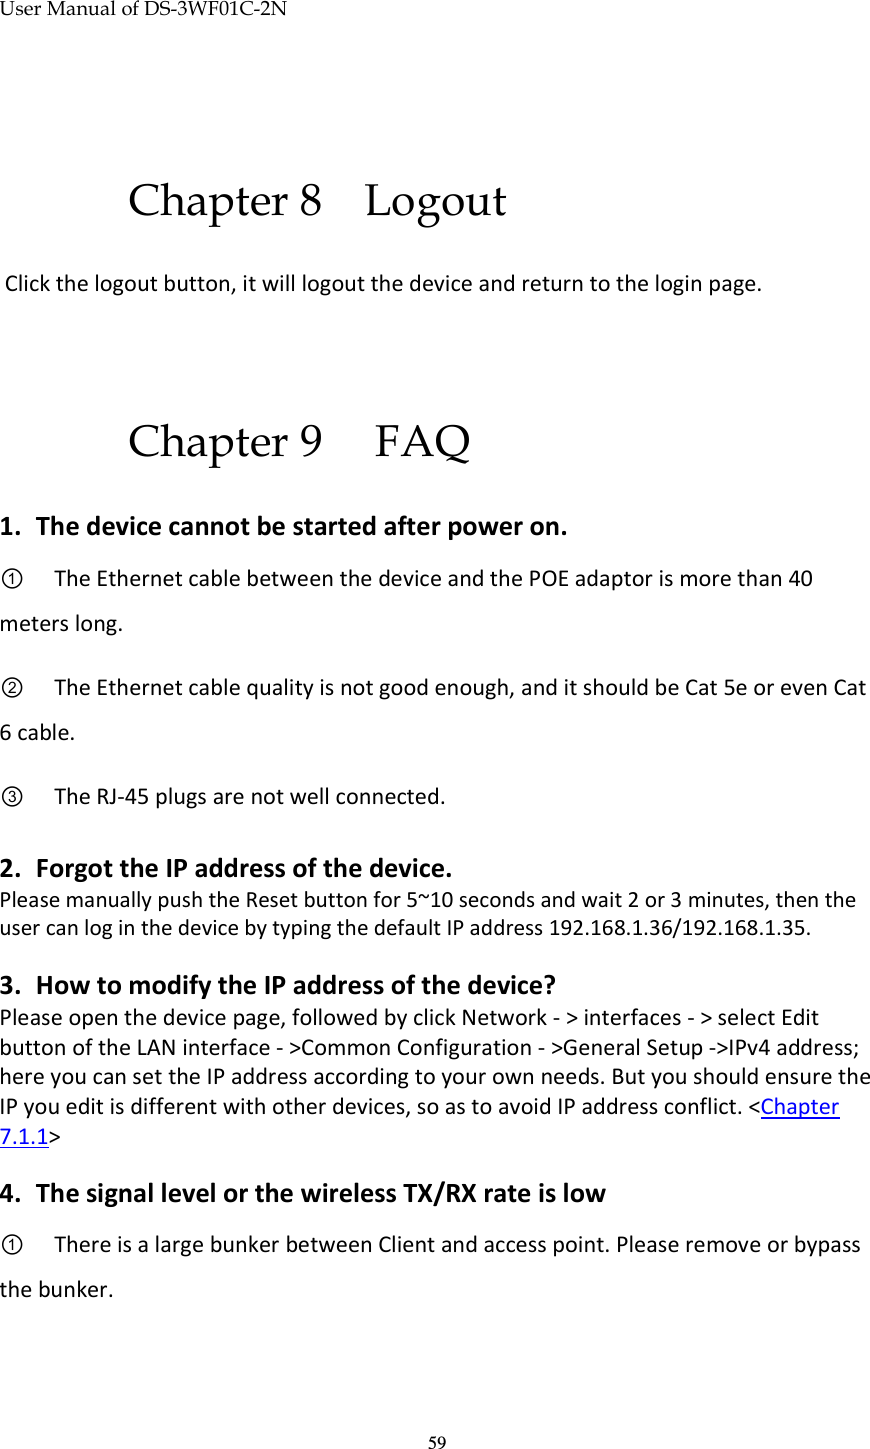 User Manual of DS-3WF01C-2N   59 Chapter 8 Logout  Click the logout button, it will logout the device and return to the login page.  Chapter 9  FAQ 1. The device cannot be started after power on.  ①   The Ethernet cable between the device and the POE adaptor is more than 40 meters long. ②   The Ethernet cable quality is not good enough, and it should be Cat 5e or even Cat 6 cable. ③   The RJ-45 plugs are not well connected.  2. Forgot the IP address of the device.   Please manually push the Reset button for 5~10 seconds and wait 2 or 3 minutes, then the user can log in the device by typing the default IP address 192.168.1.36/192.168.1.35.  3. How to modify the IP address of the device? Please open the device page, followed by click Network - &gt; interfaces - &gt; select Edit button of the LAN interface - &gt;Common Configuration - &gt;General Setup -&gt;IPv4 address; here you can set the IP address according to your own needs. But you should ensure the IP you edit is different with other devices, so as to avoid IP address conflict. &lt;Chapter 7.1.1&gt;   4. The signal level or the wireless TX/RX rate is low ①   There is a large bunker between Client and access point. Please remove or bypass the bunker.  